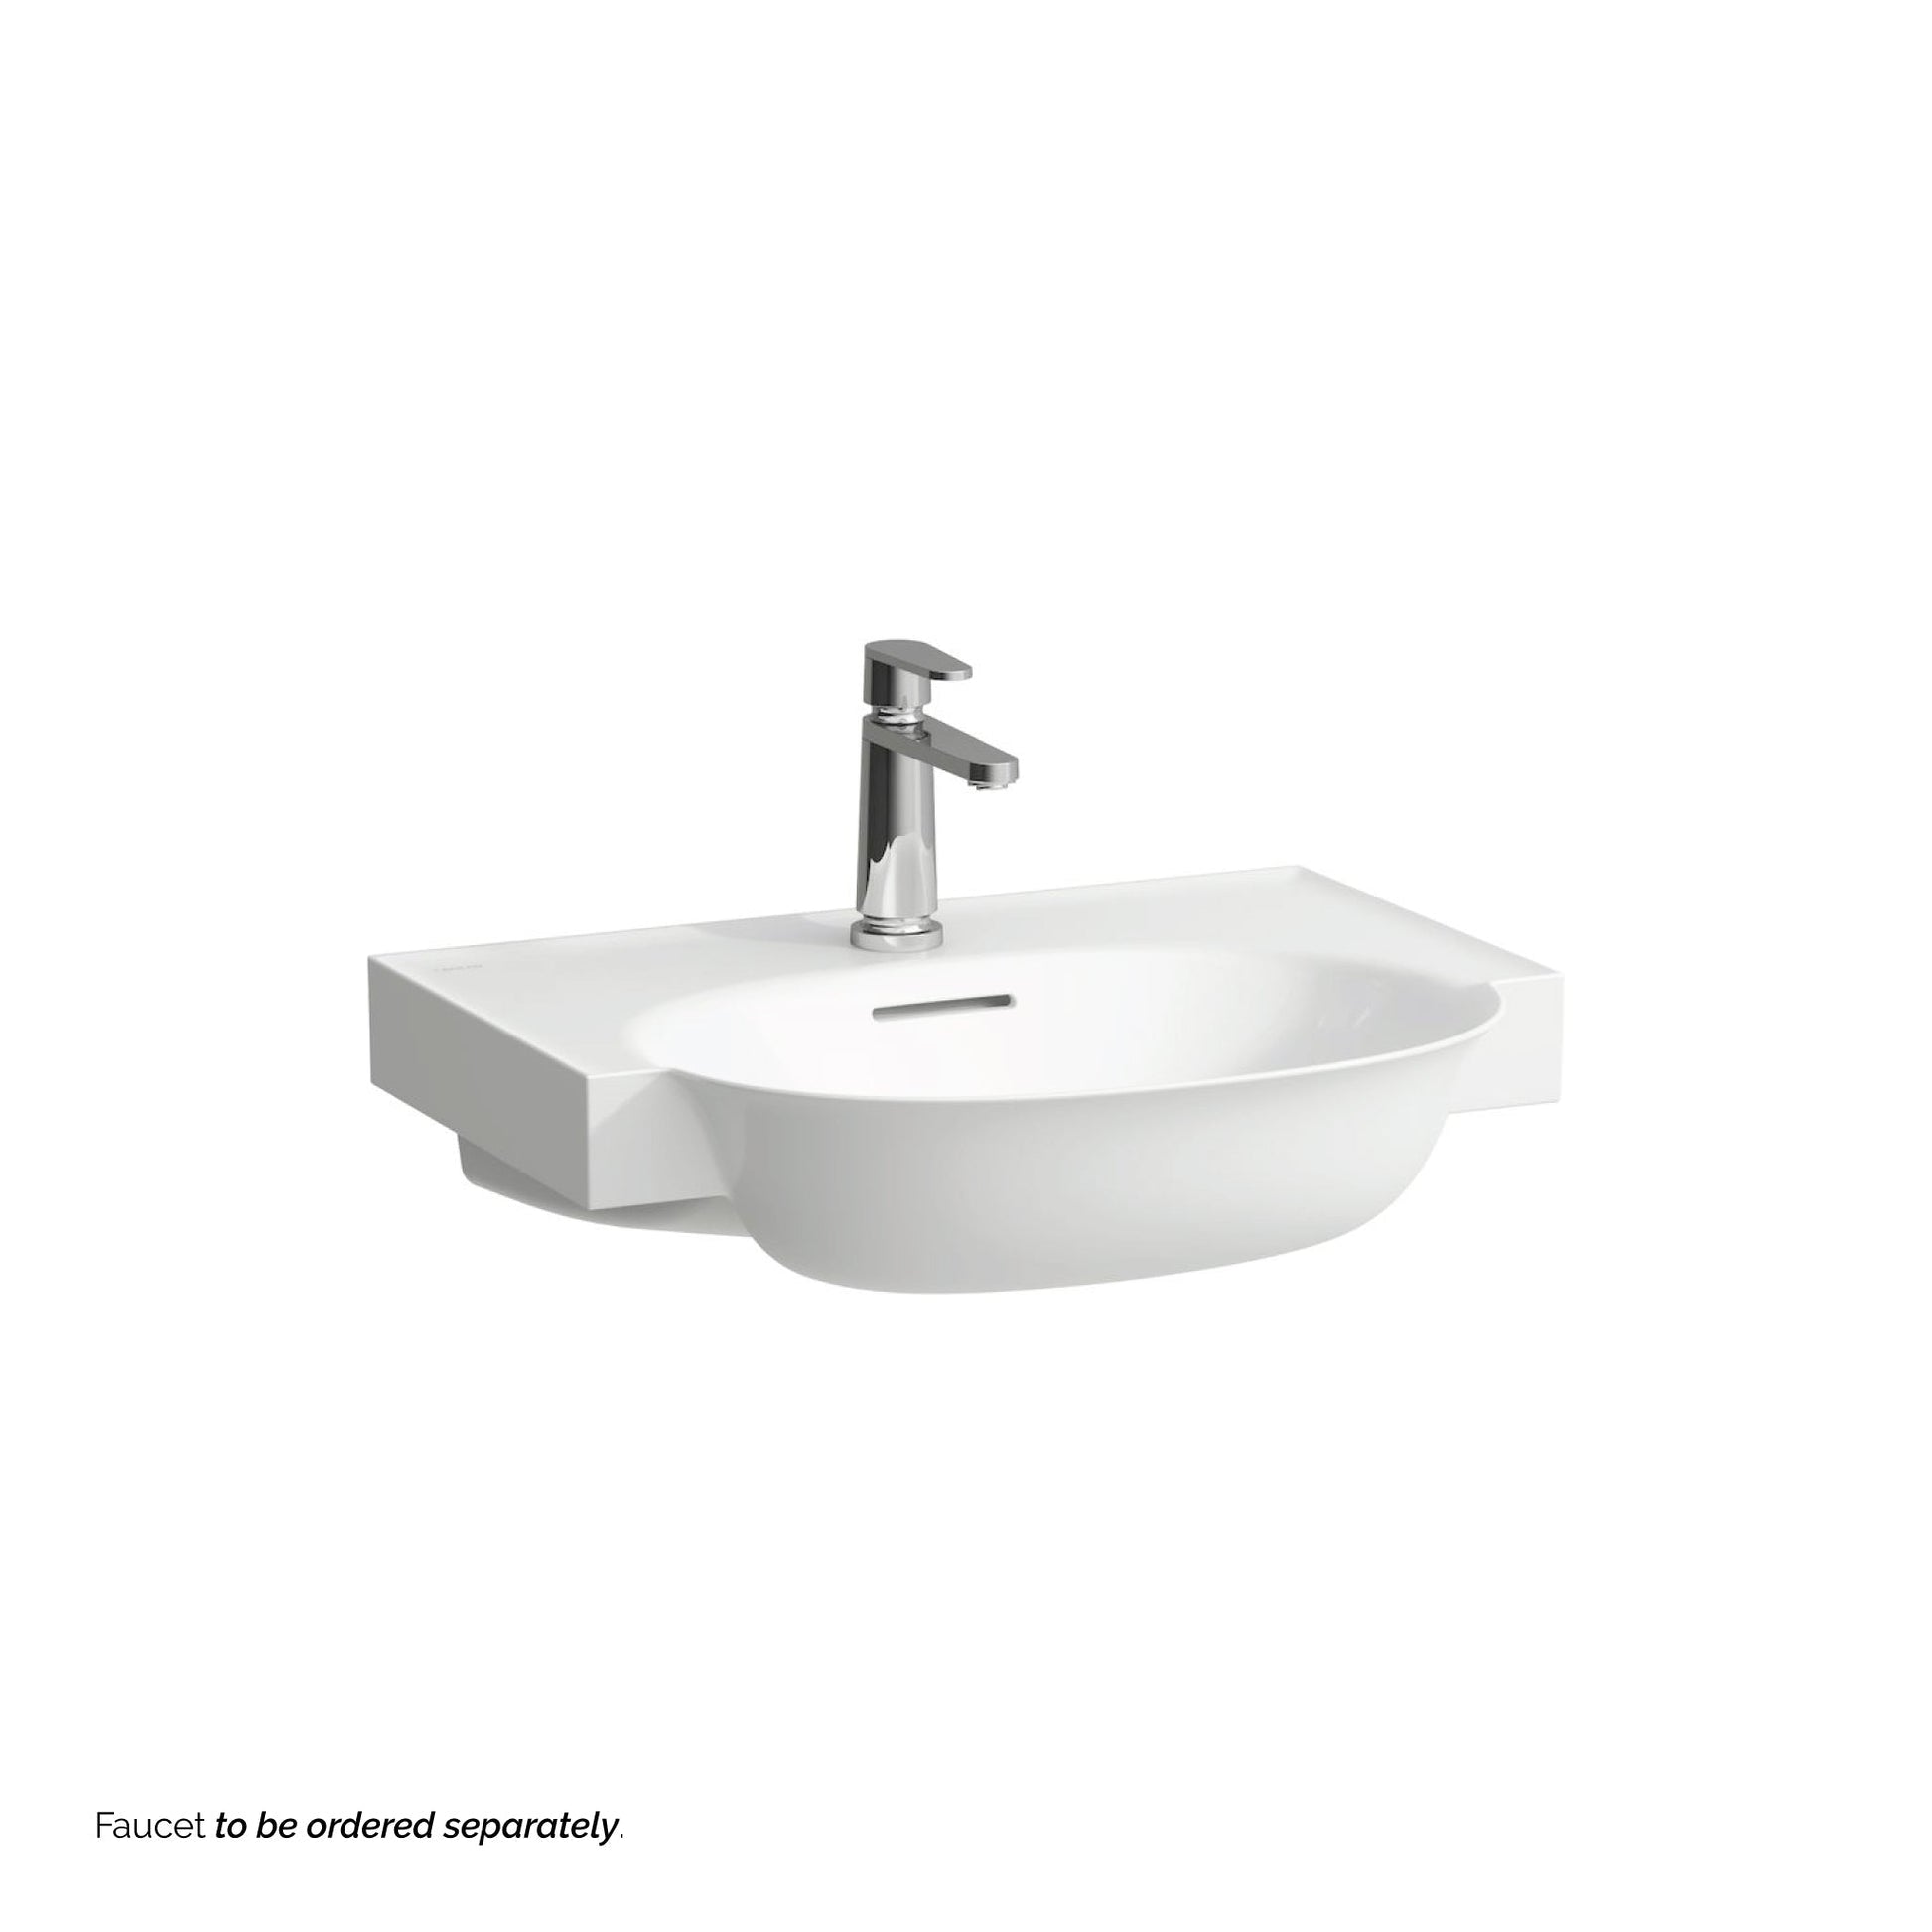 Laufen New Classic 24" x 19" Matte White Ceramic Wall-Mounted Bathroom Sink With Faucet Hole